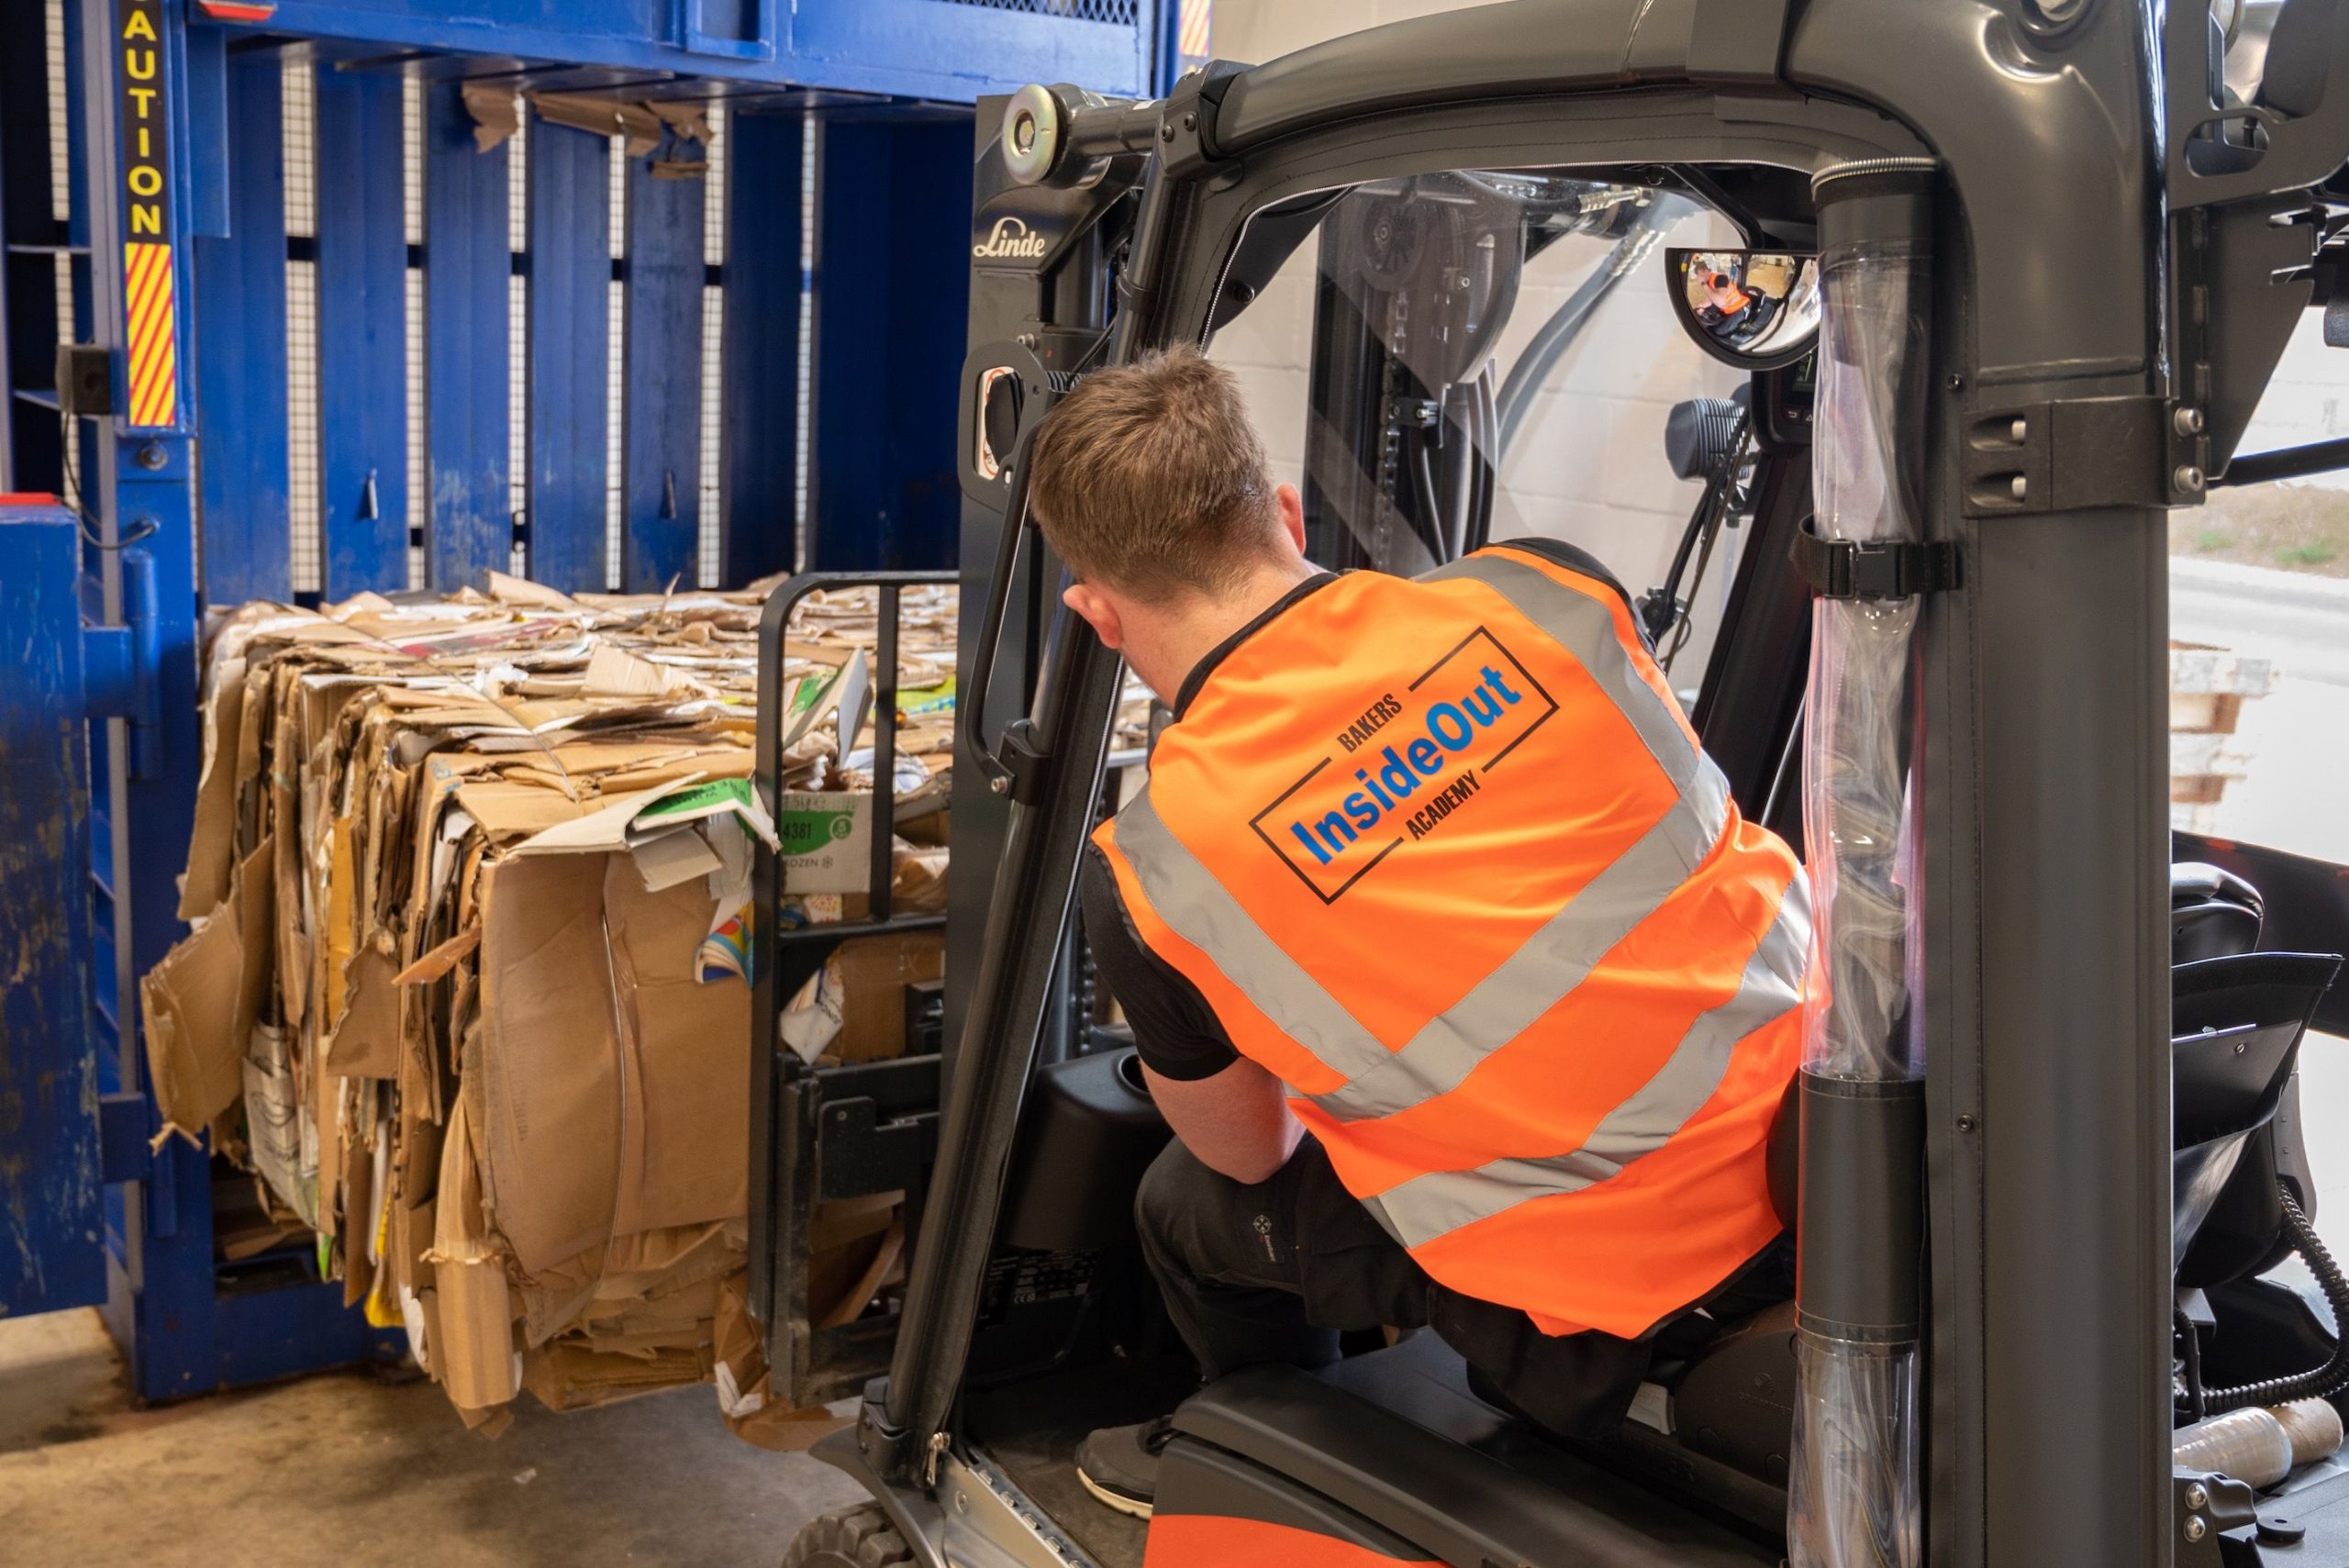 Environmental waste management company supports HMP Five Wells prisoners with job opportunities to prevent re-offending